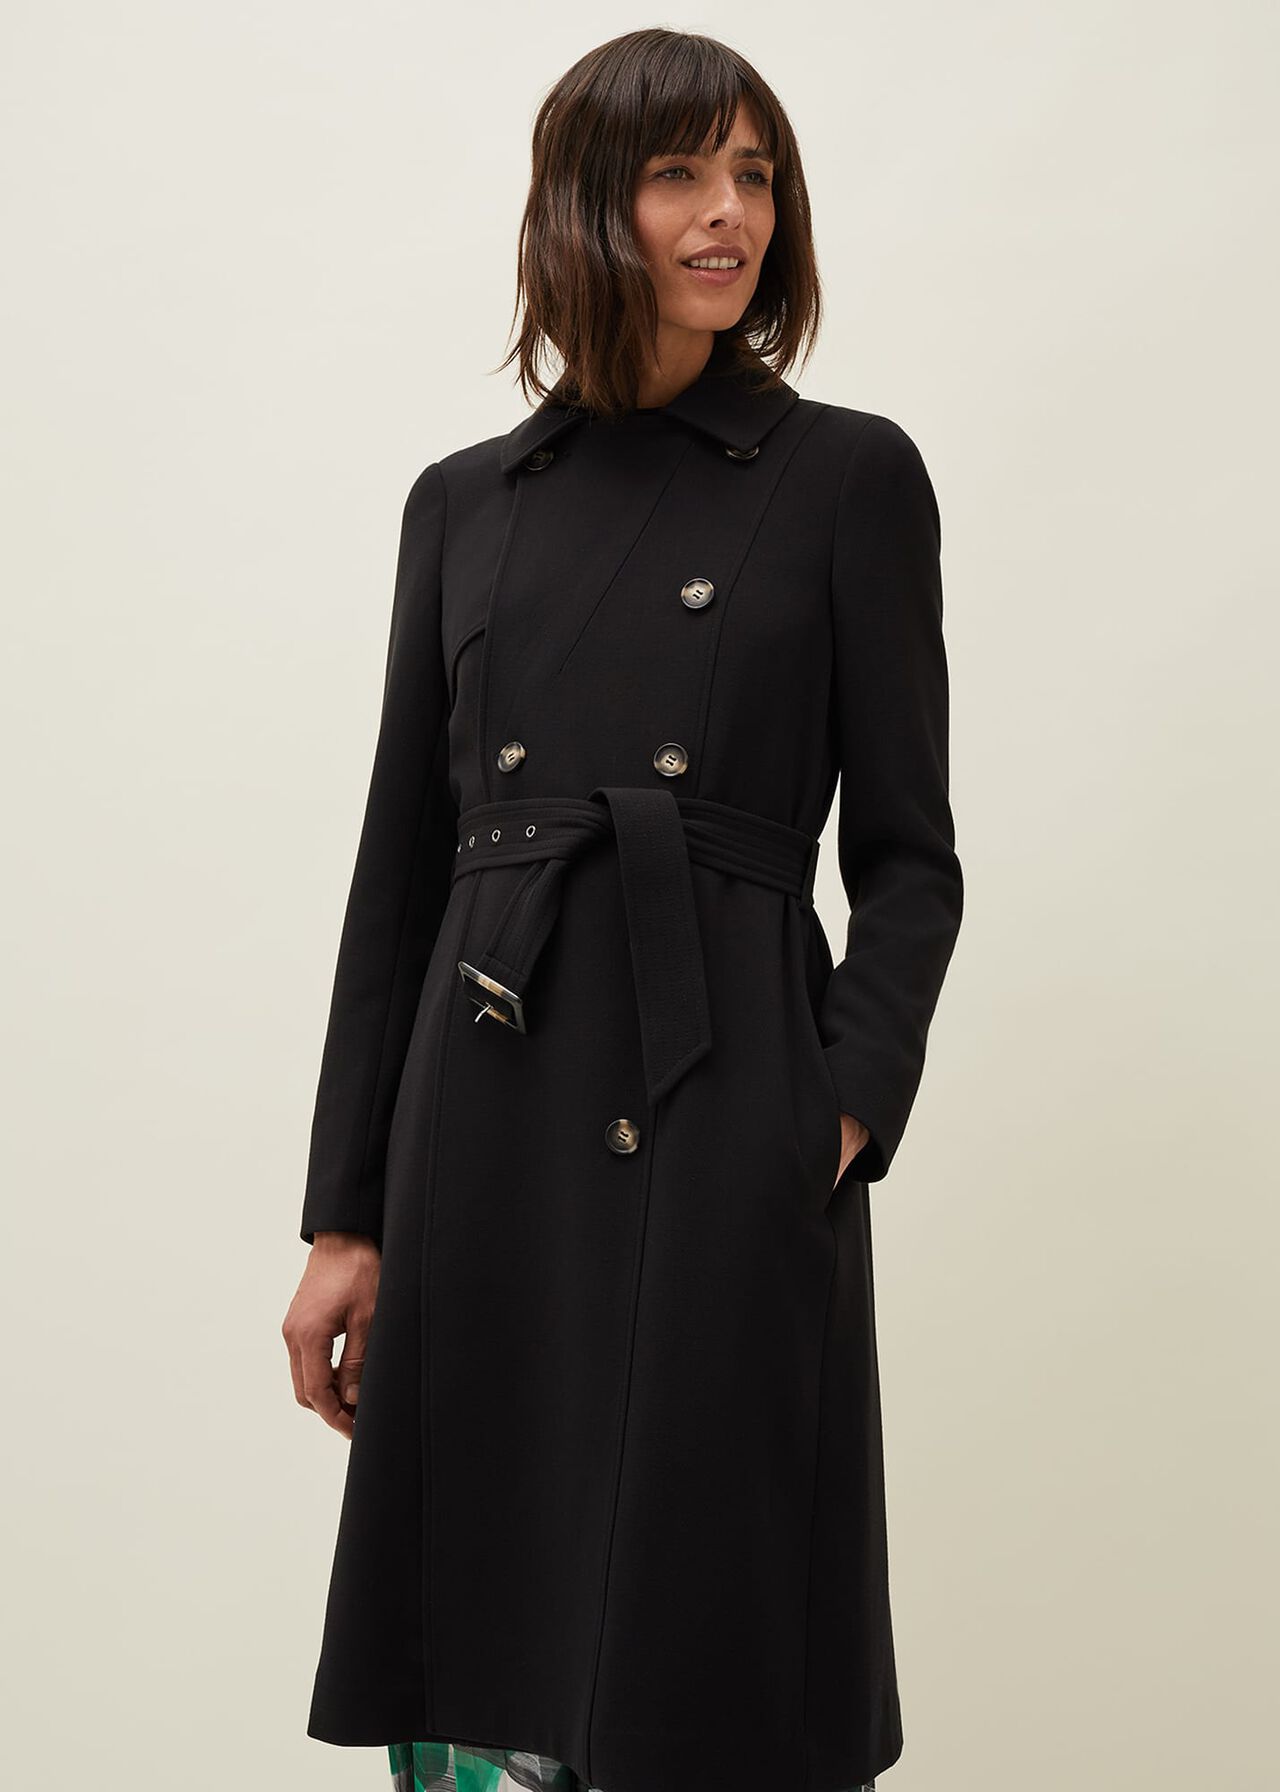 Emmy Pleat Back Trench Coat